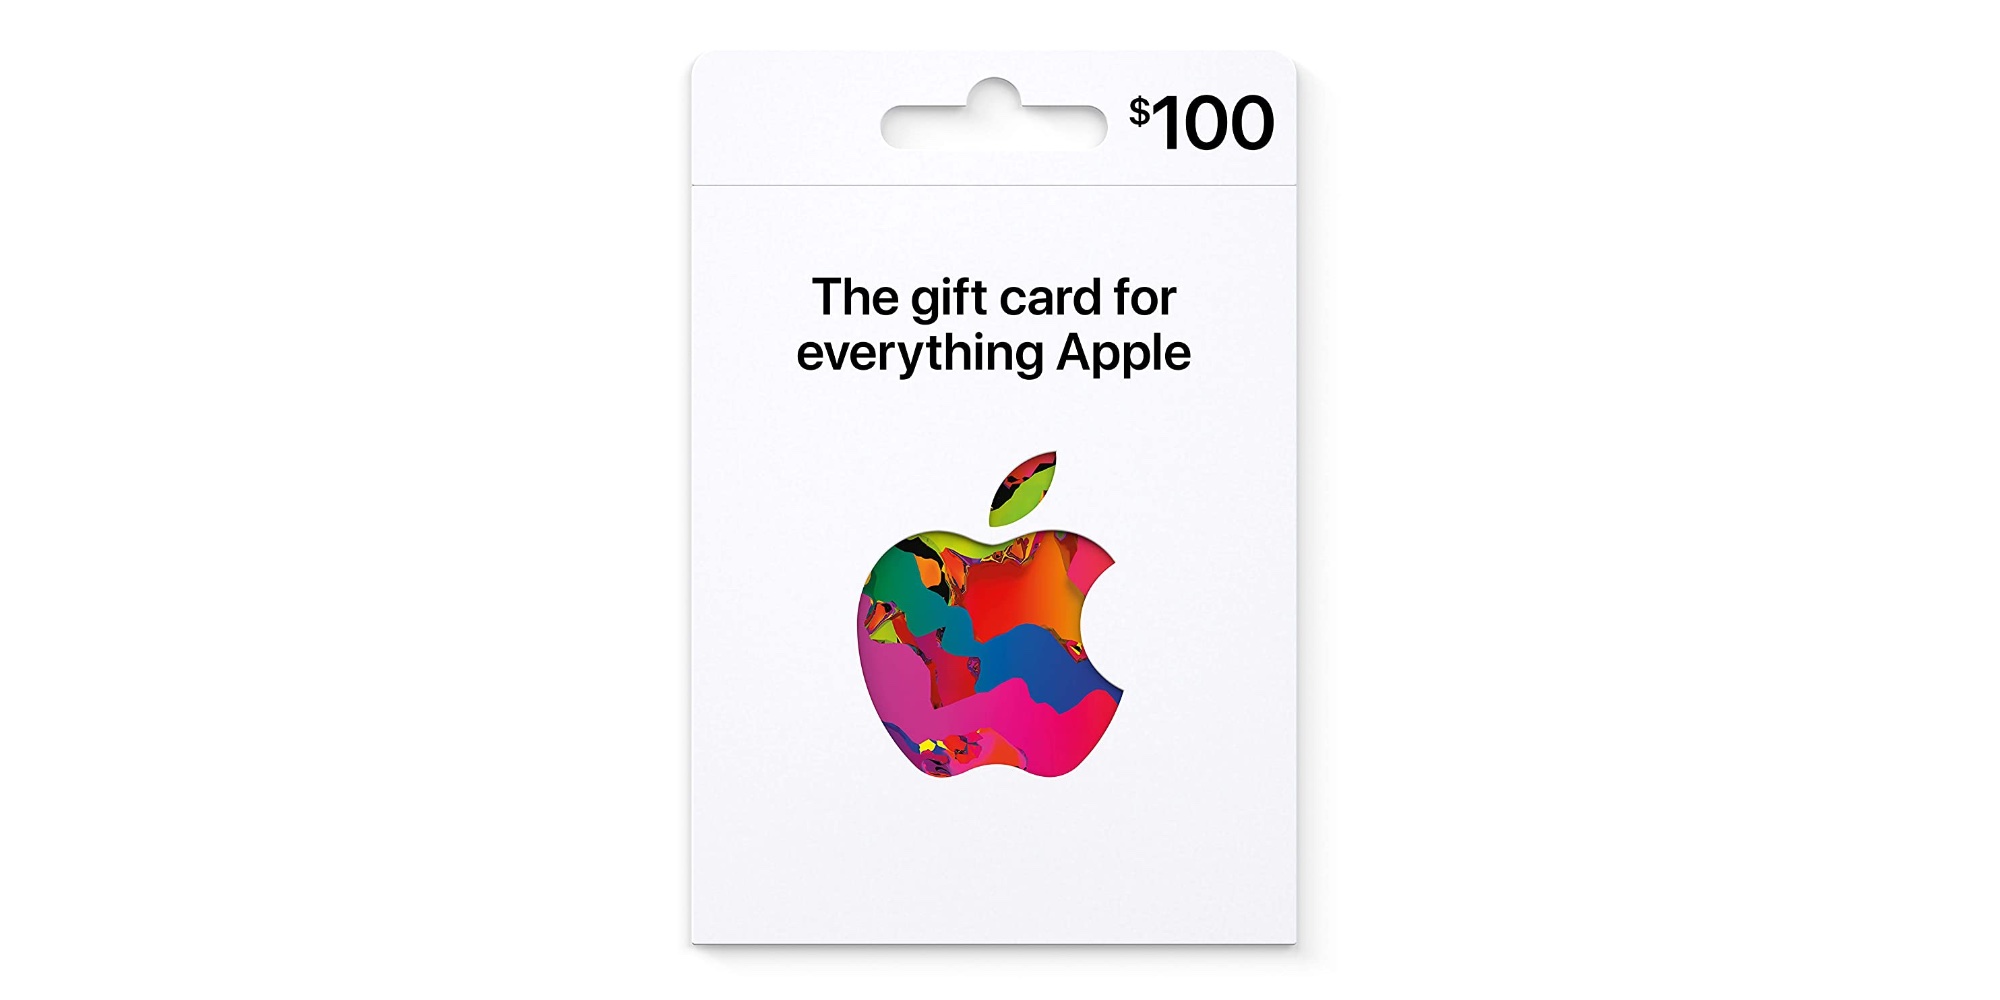 Apple Gift Card Deal 2021: Buy $100 or More, Get $10  Credits •  iPhone in Canada Blog